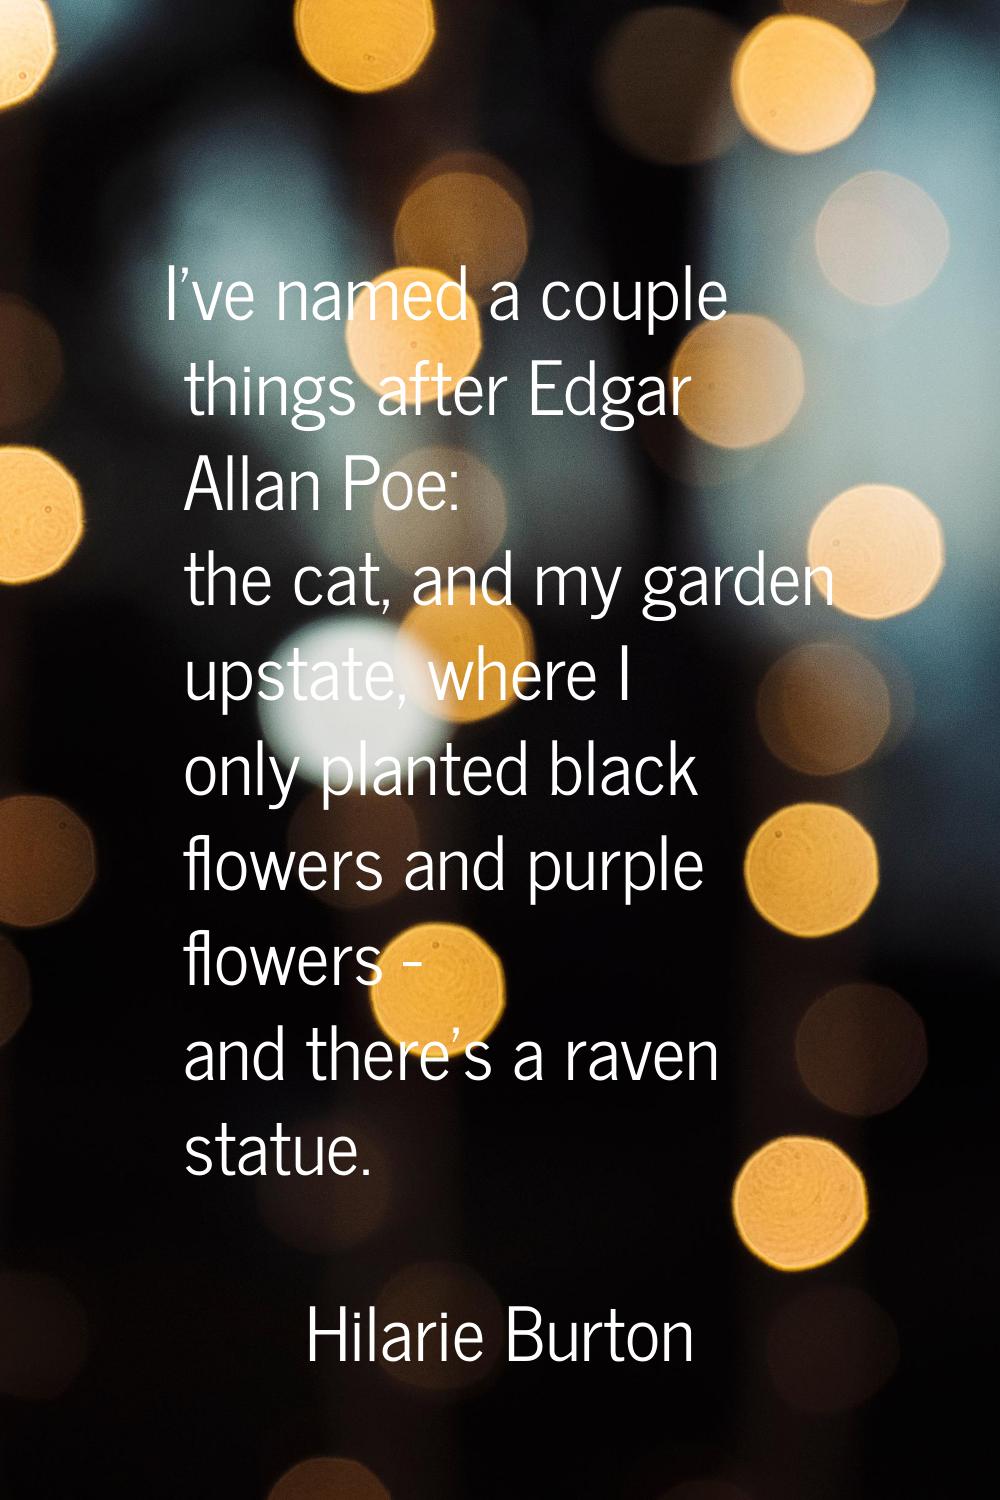 I've named a couple things after Edgar Allan Poe: the cat, and my garden upstate, where I only plan